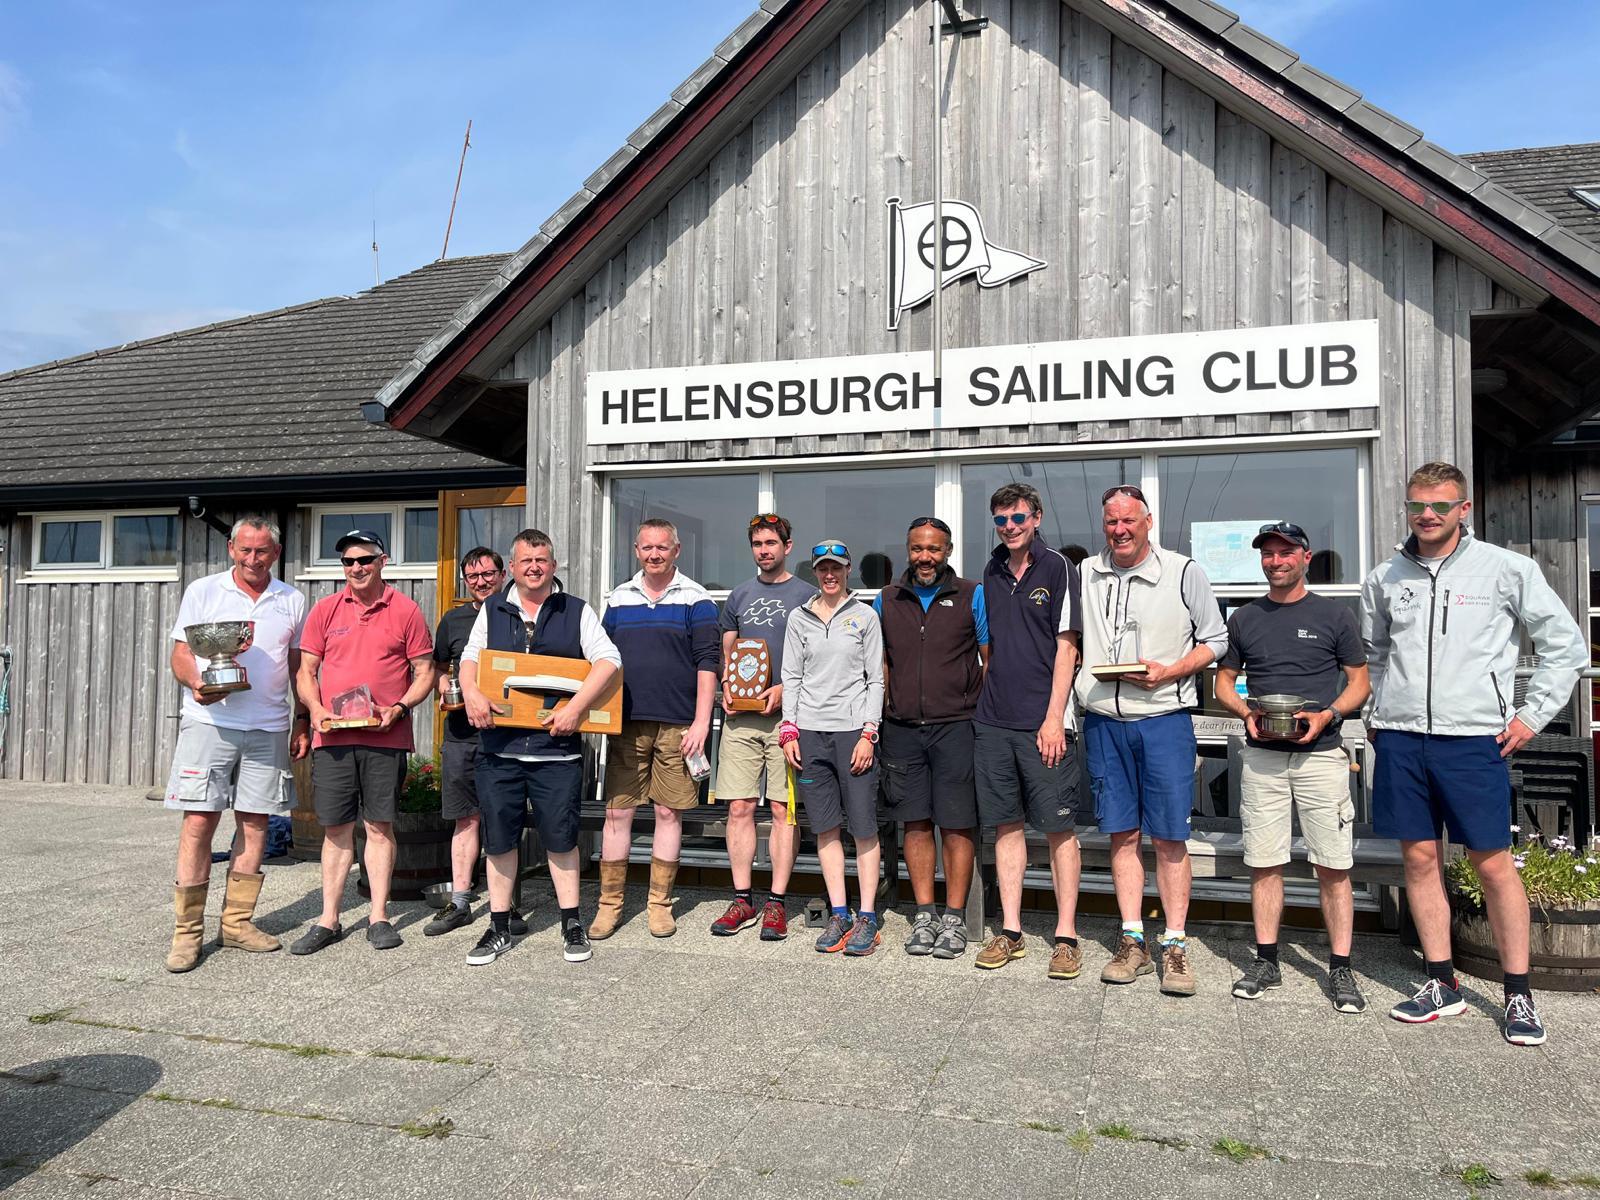 Prize winners and crew members in the ‘Sigma Nationals’, hosted by Helensburgh Sailing Club and won by Griogair Whyte of the Royal Northern and Clyde Yacht Club on board Close Encounters